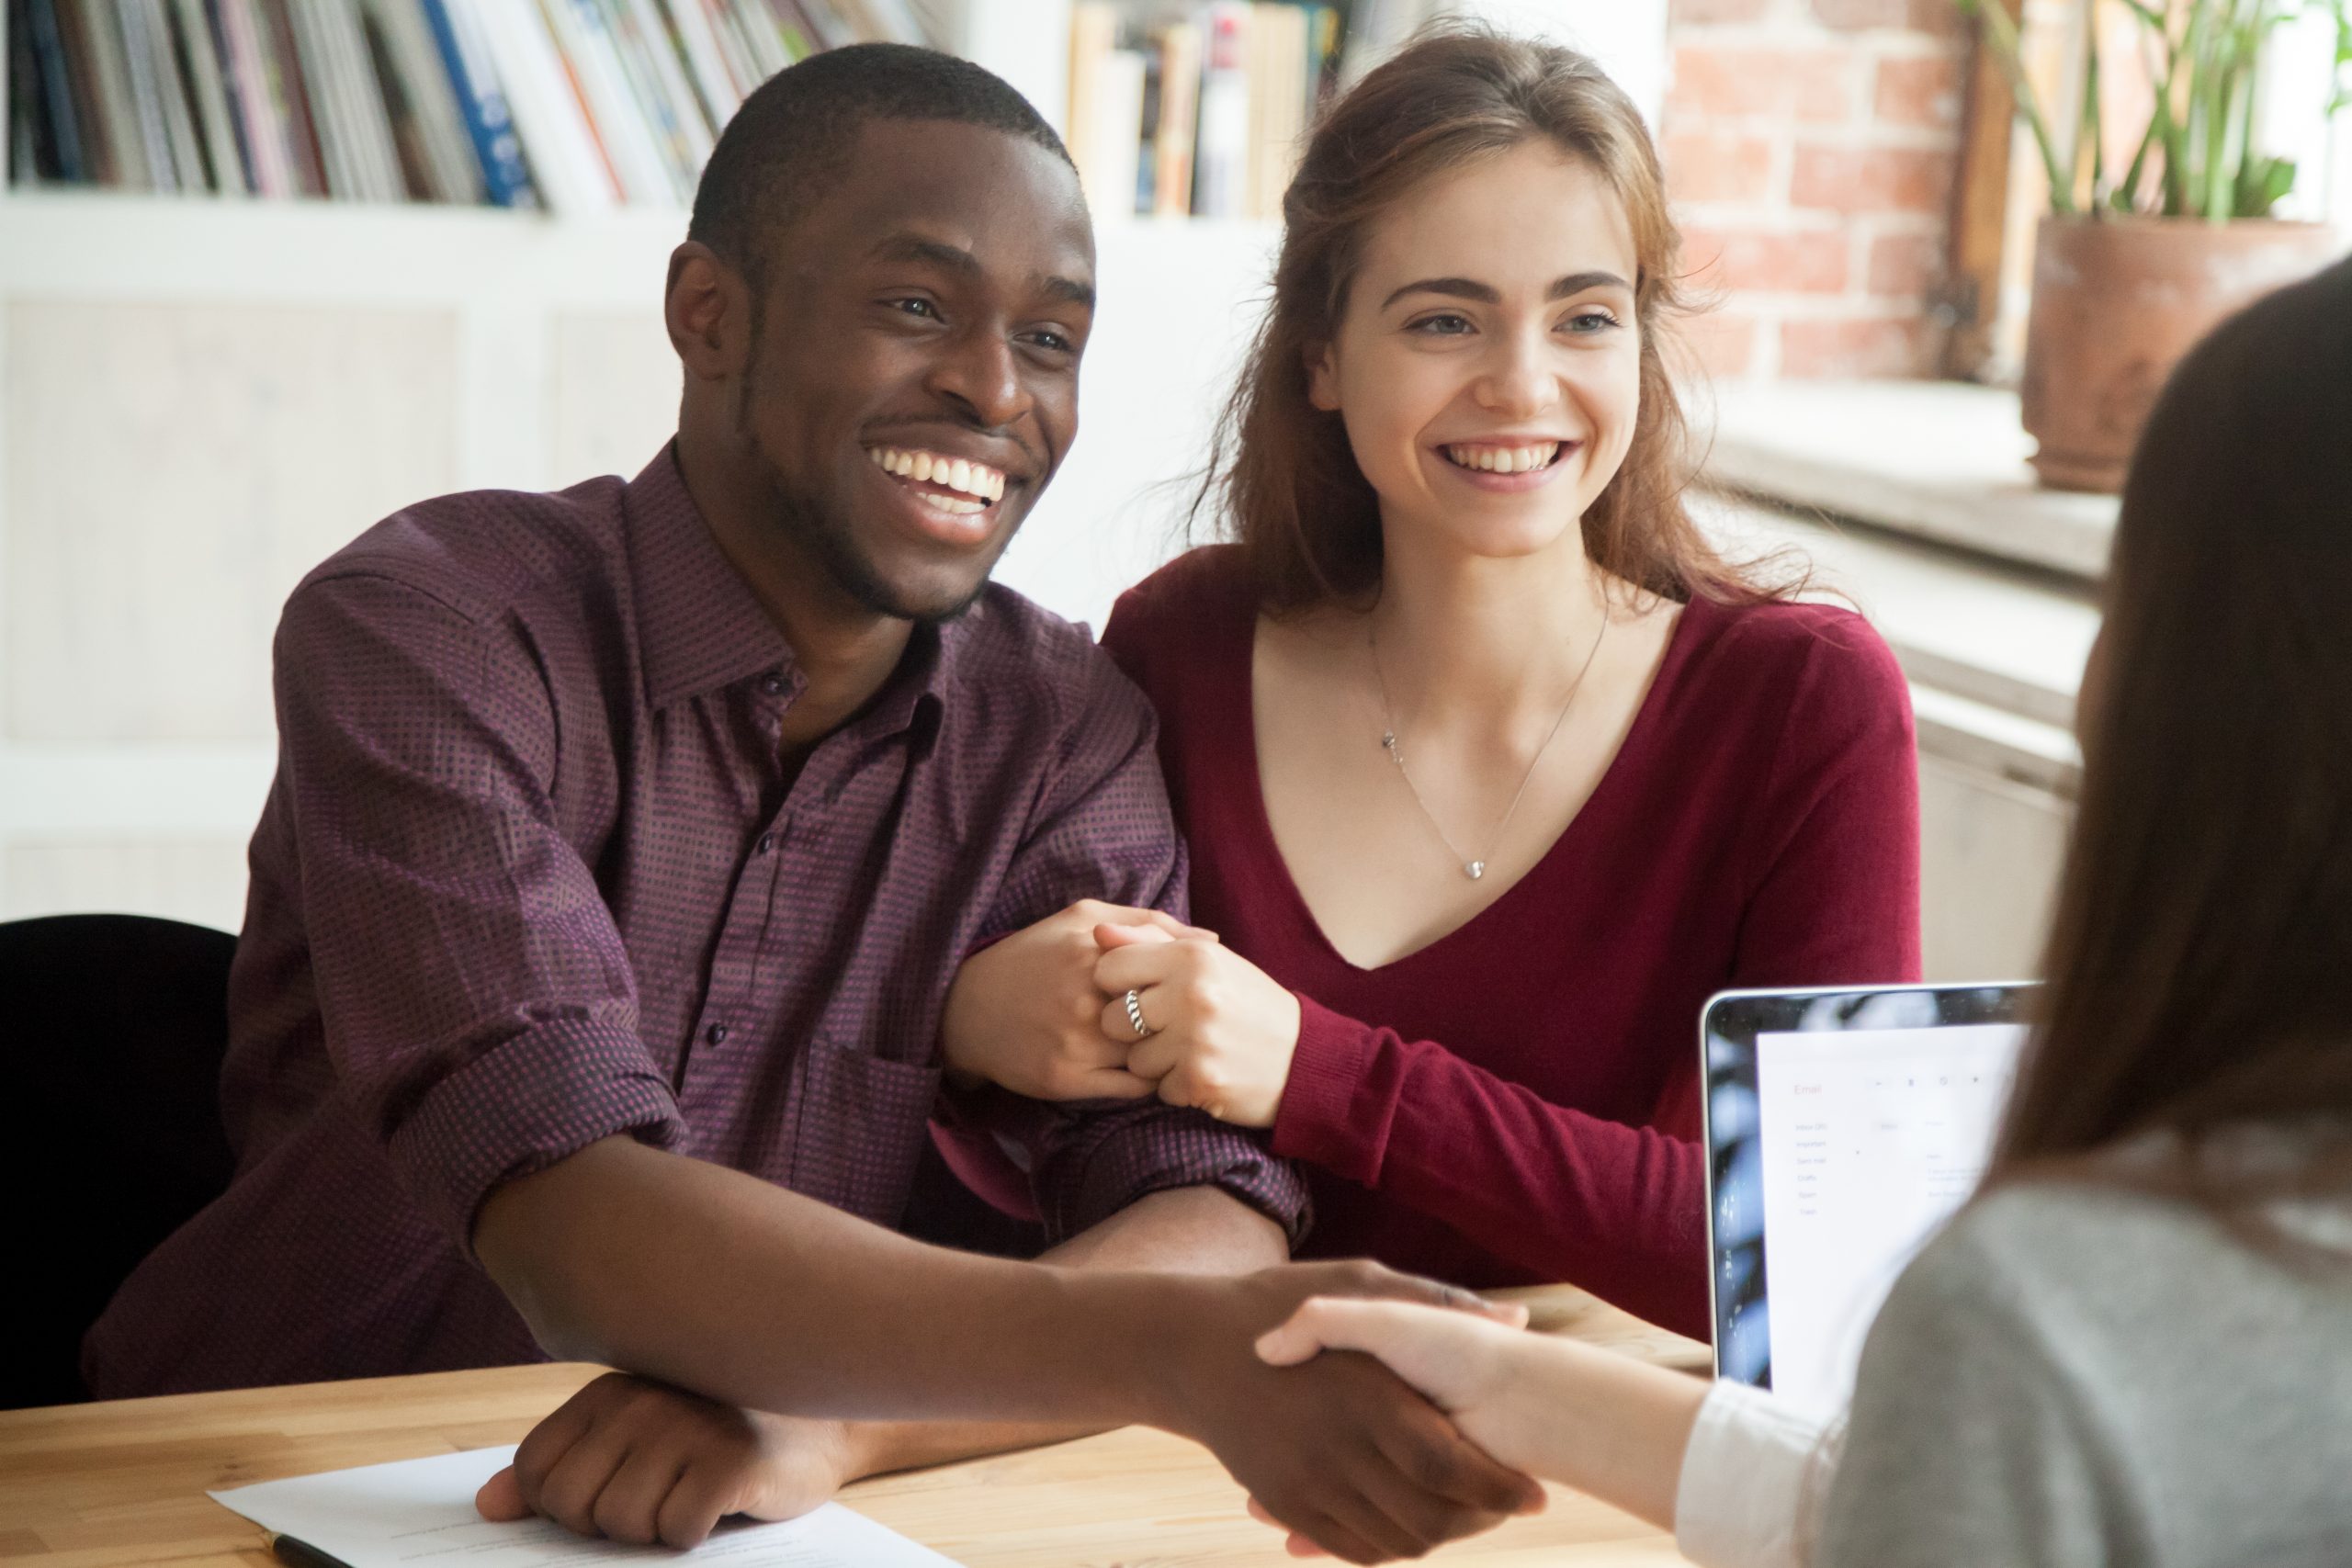 A happy young couple learn that they are eligible for a debt consolidation loan and shake the provider's hand in agreement